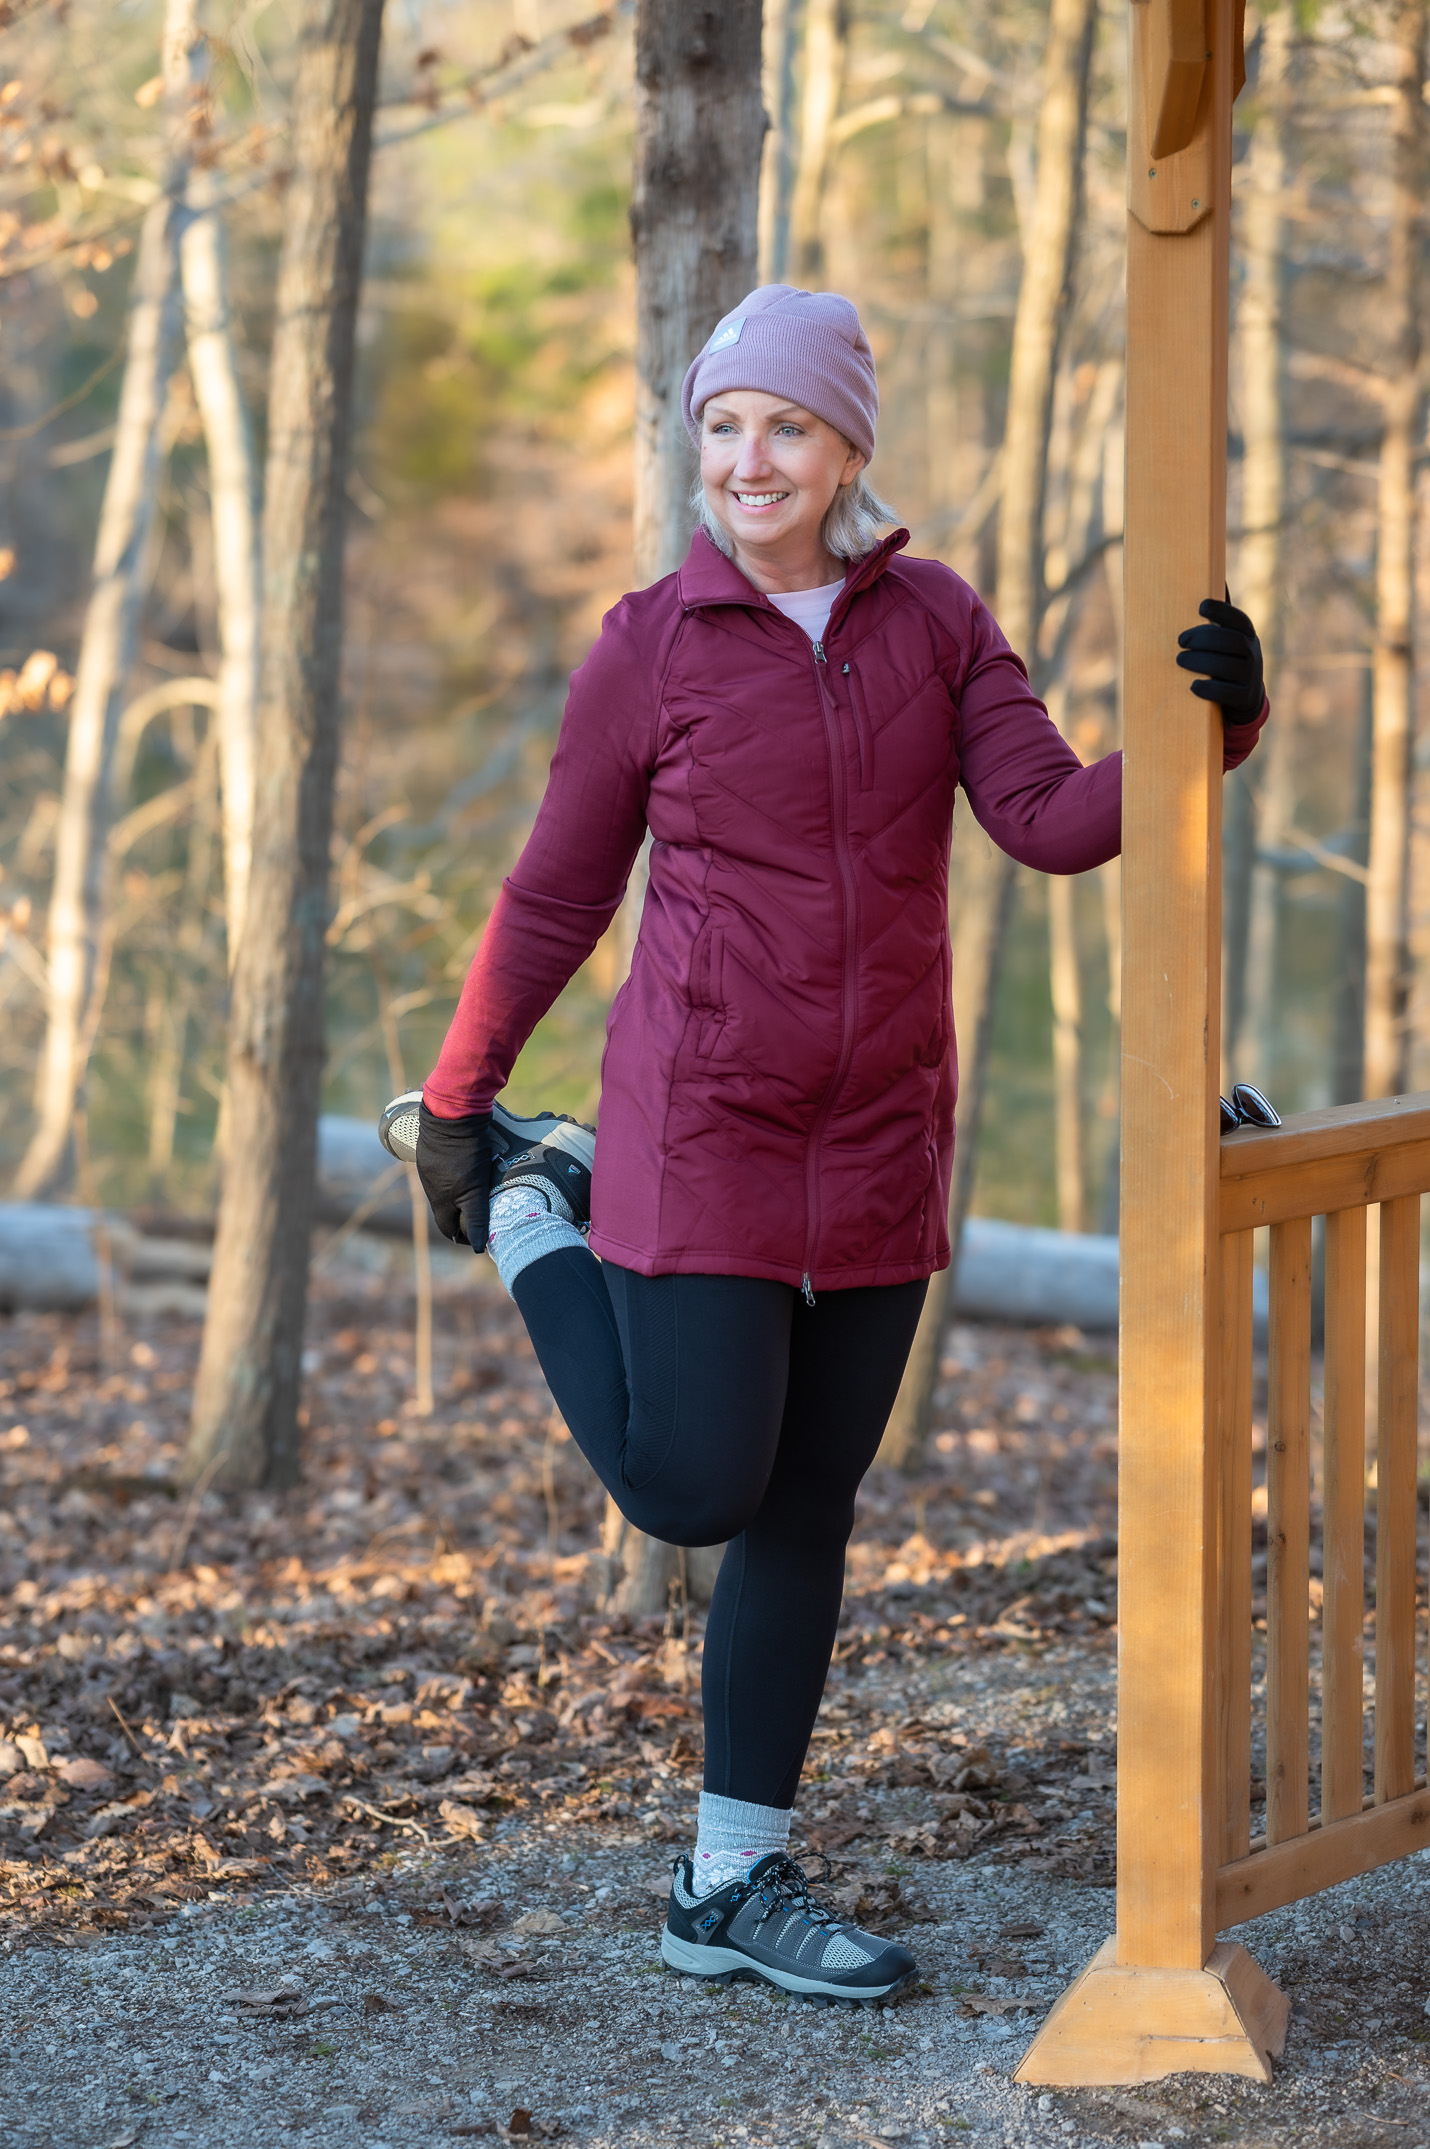 Get Outside for Fitness this Winter - Dressed for My Day